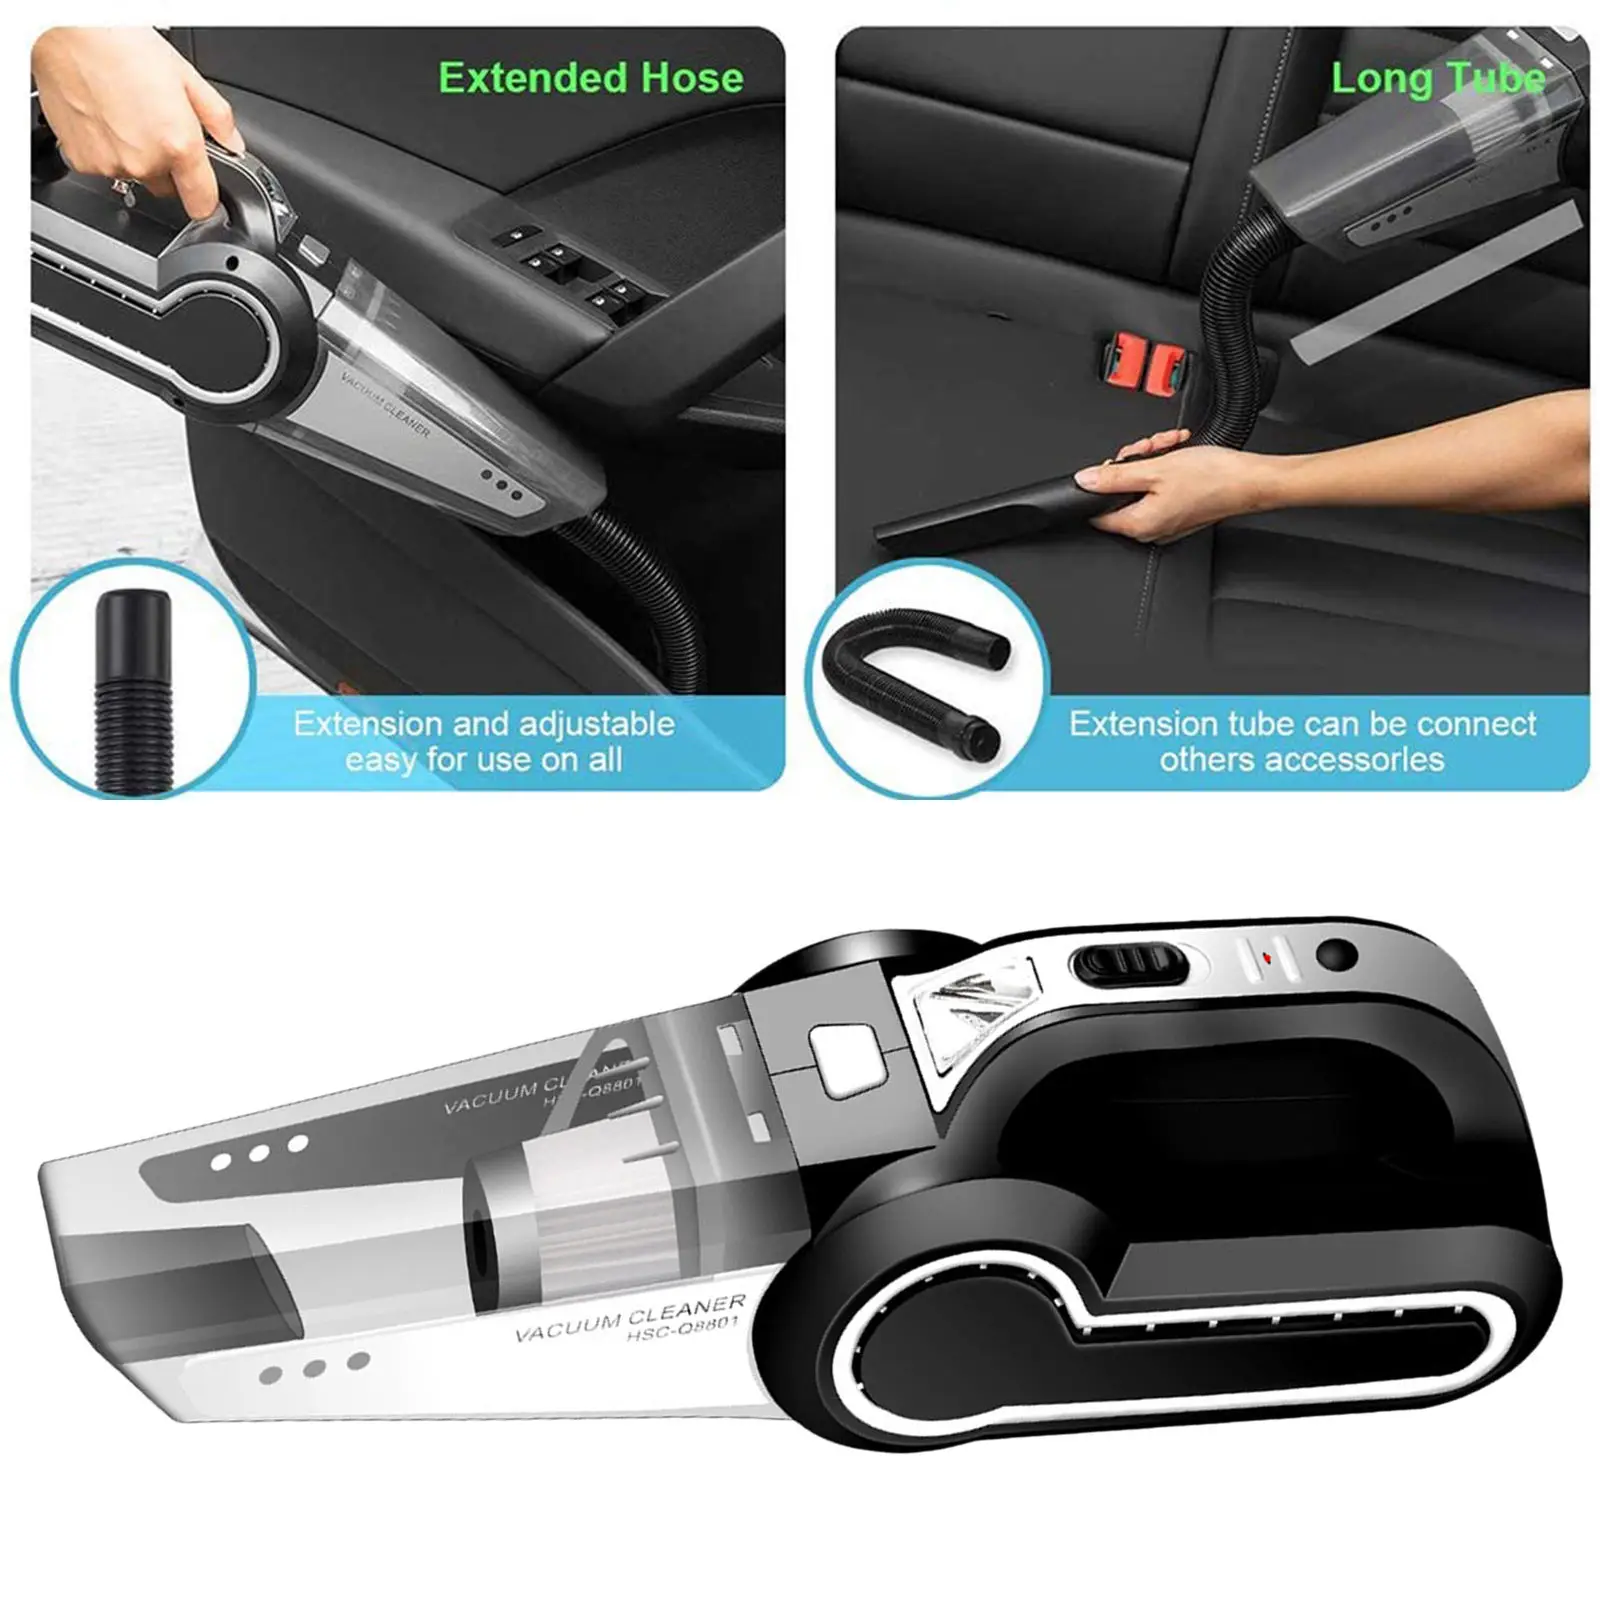 Vacuum Cleaner Wireless Vacuum Cleaner For Car Vacuum Cleaner Portable Cordless Vaccum Cleaners Powerful Dry Wet